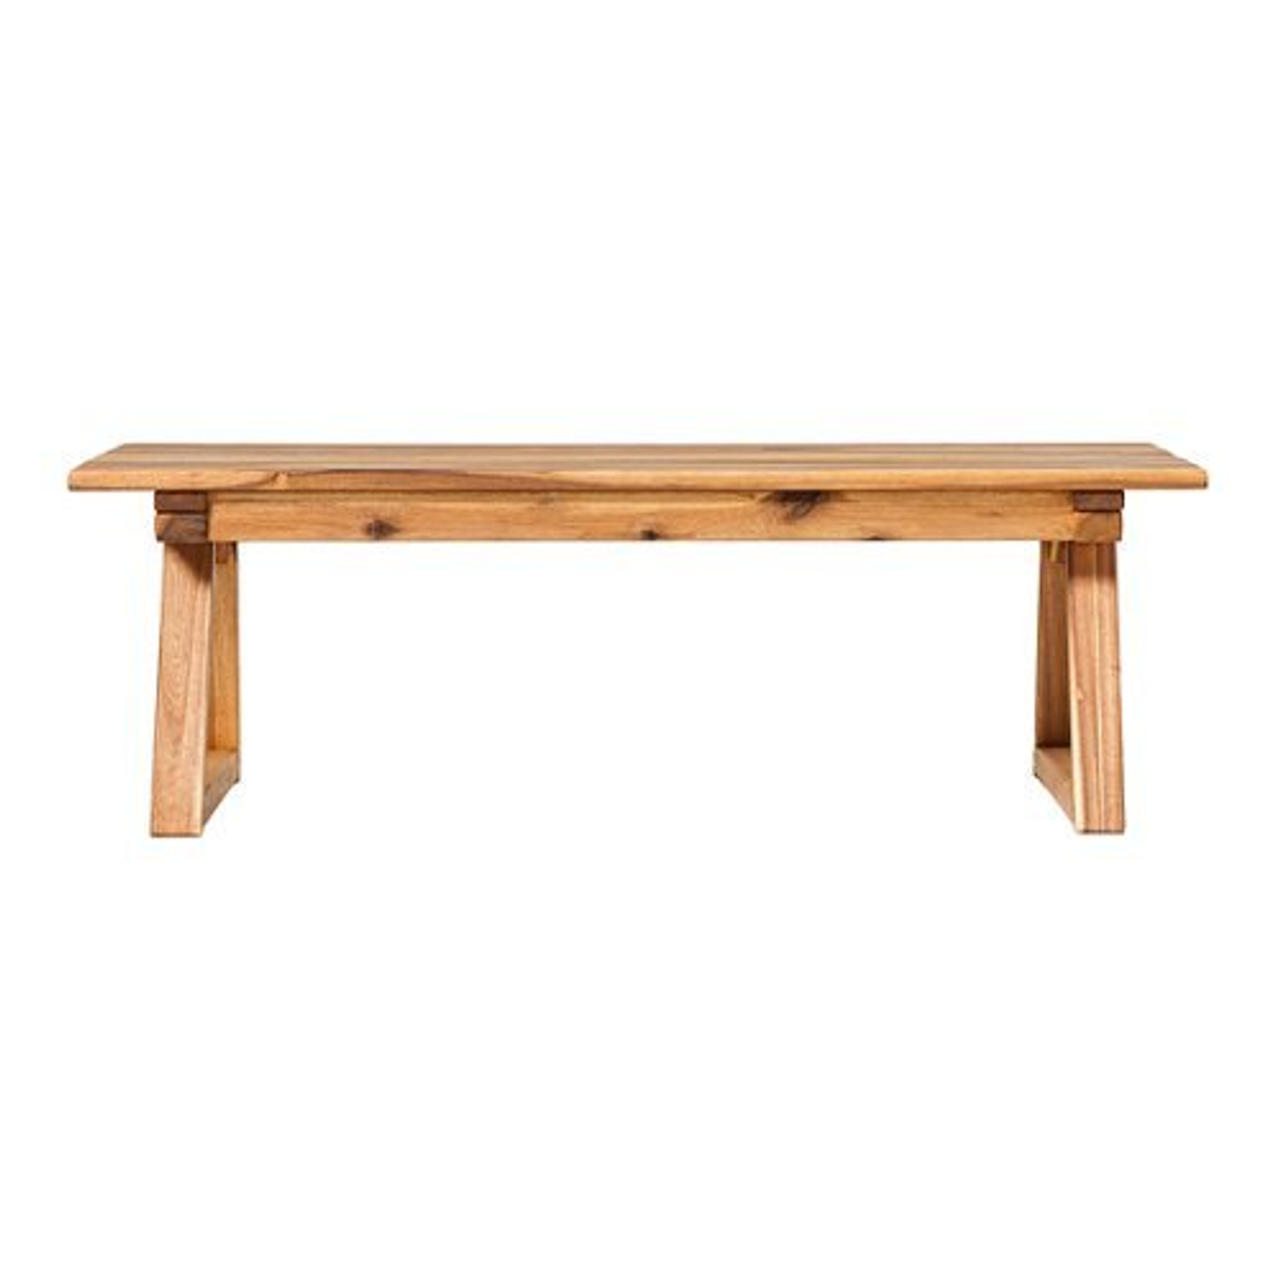 Walker Edison - Modern Solid Acacia Wood Slatted Outdoor Coffee Table - Natural